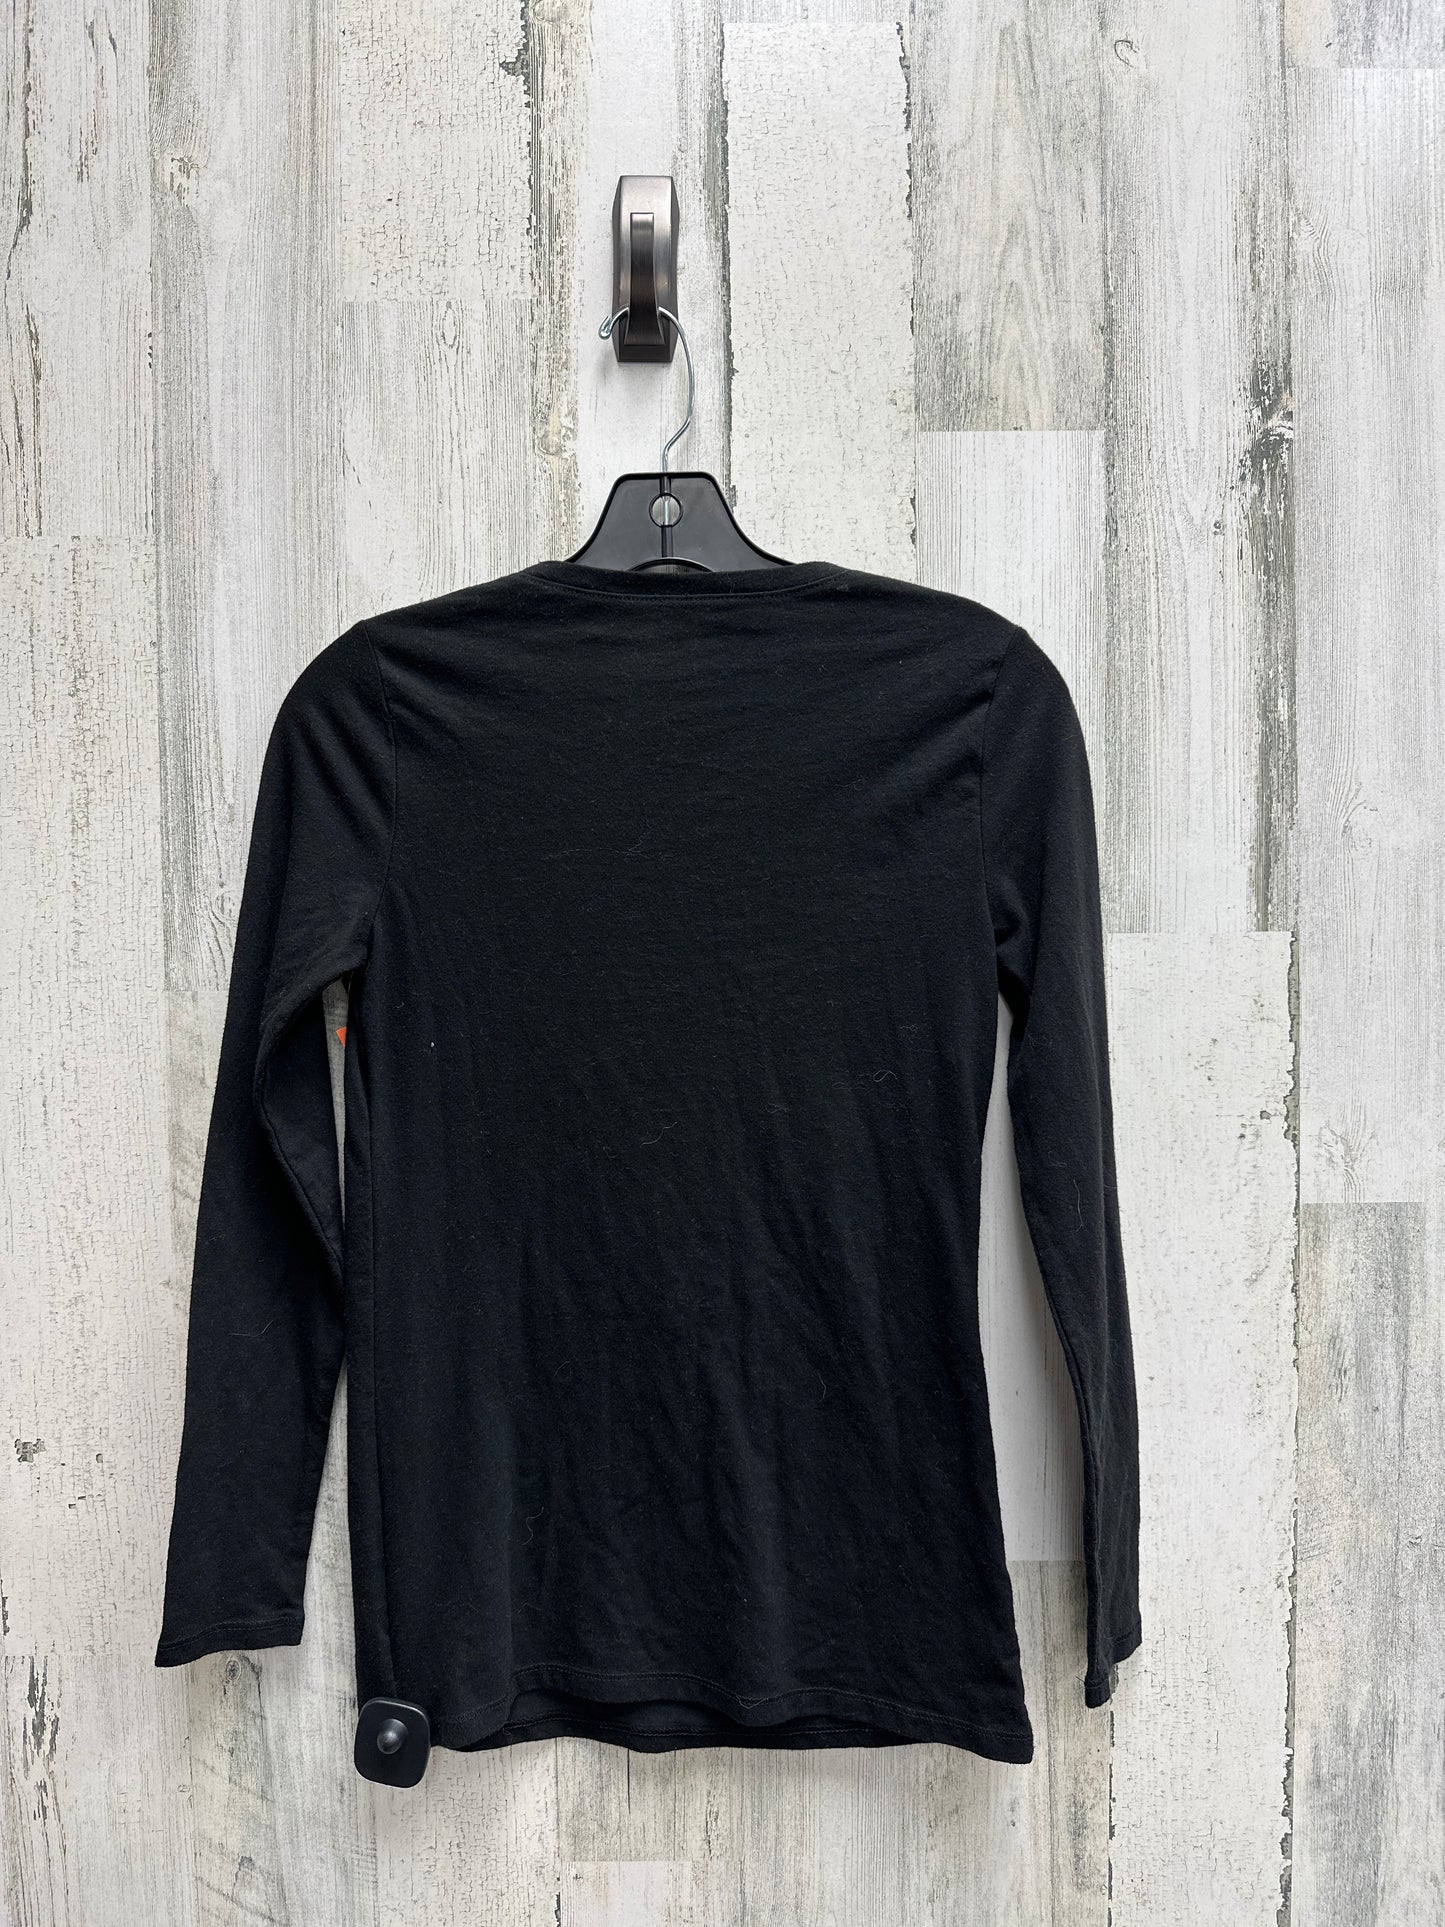 Top Long Sleeve By No Boundaries  Size: M